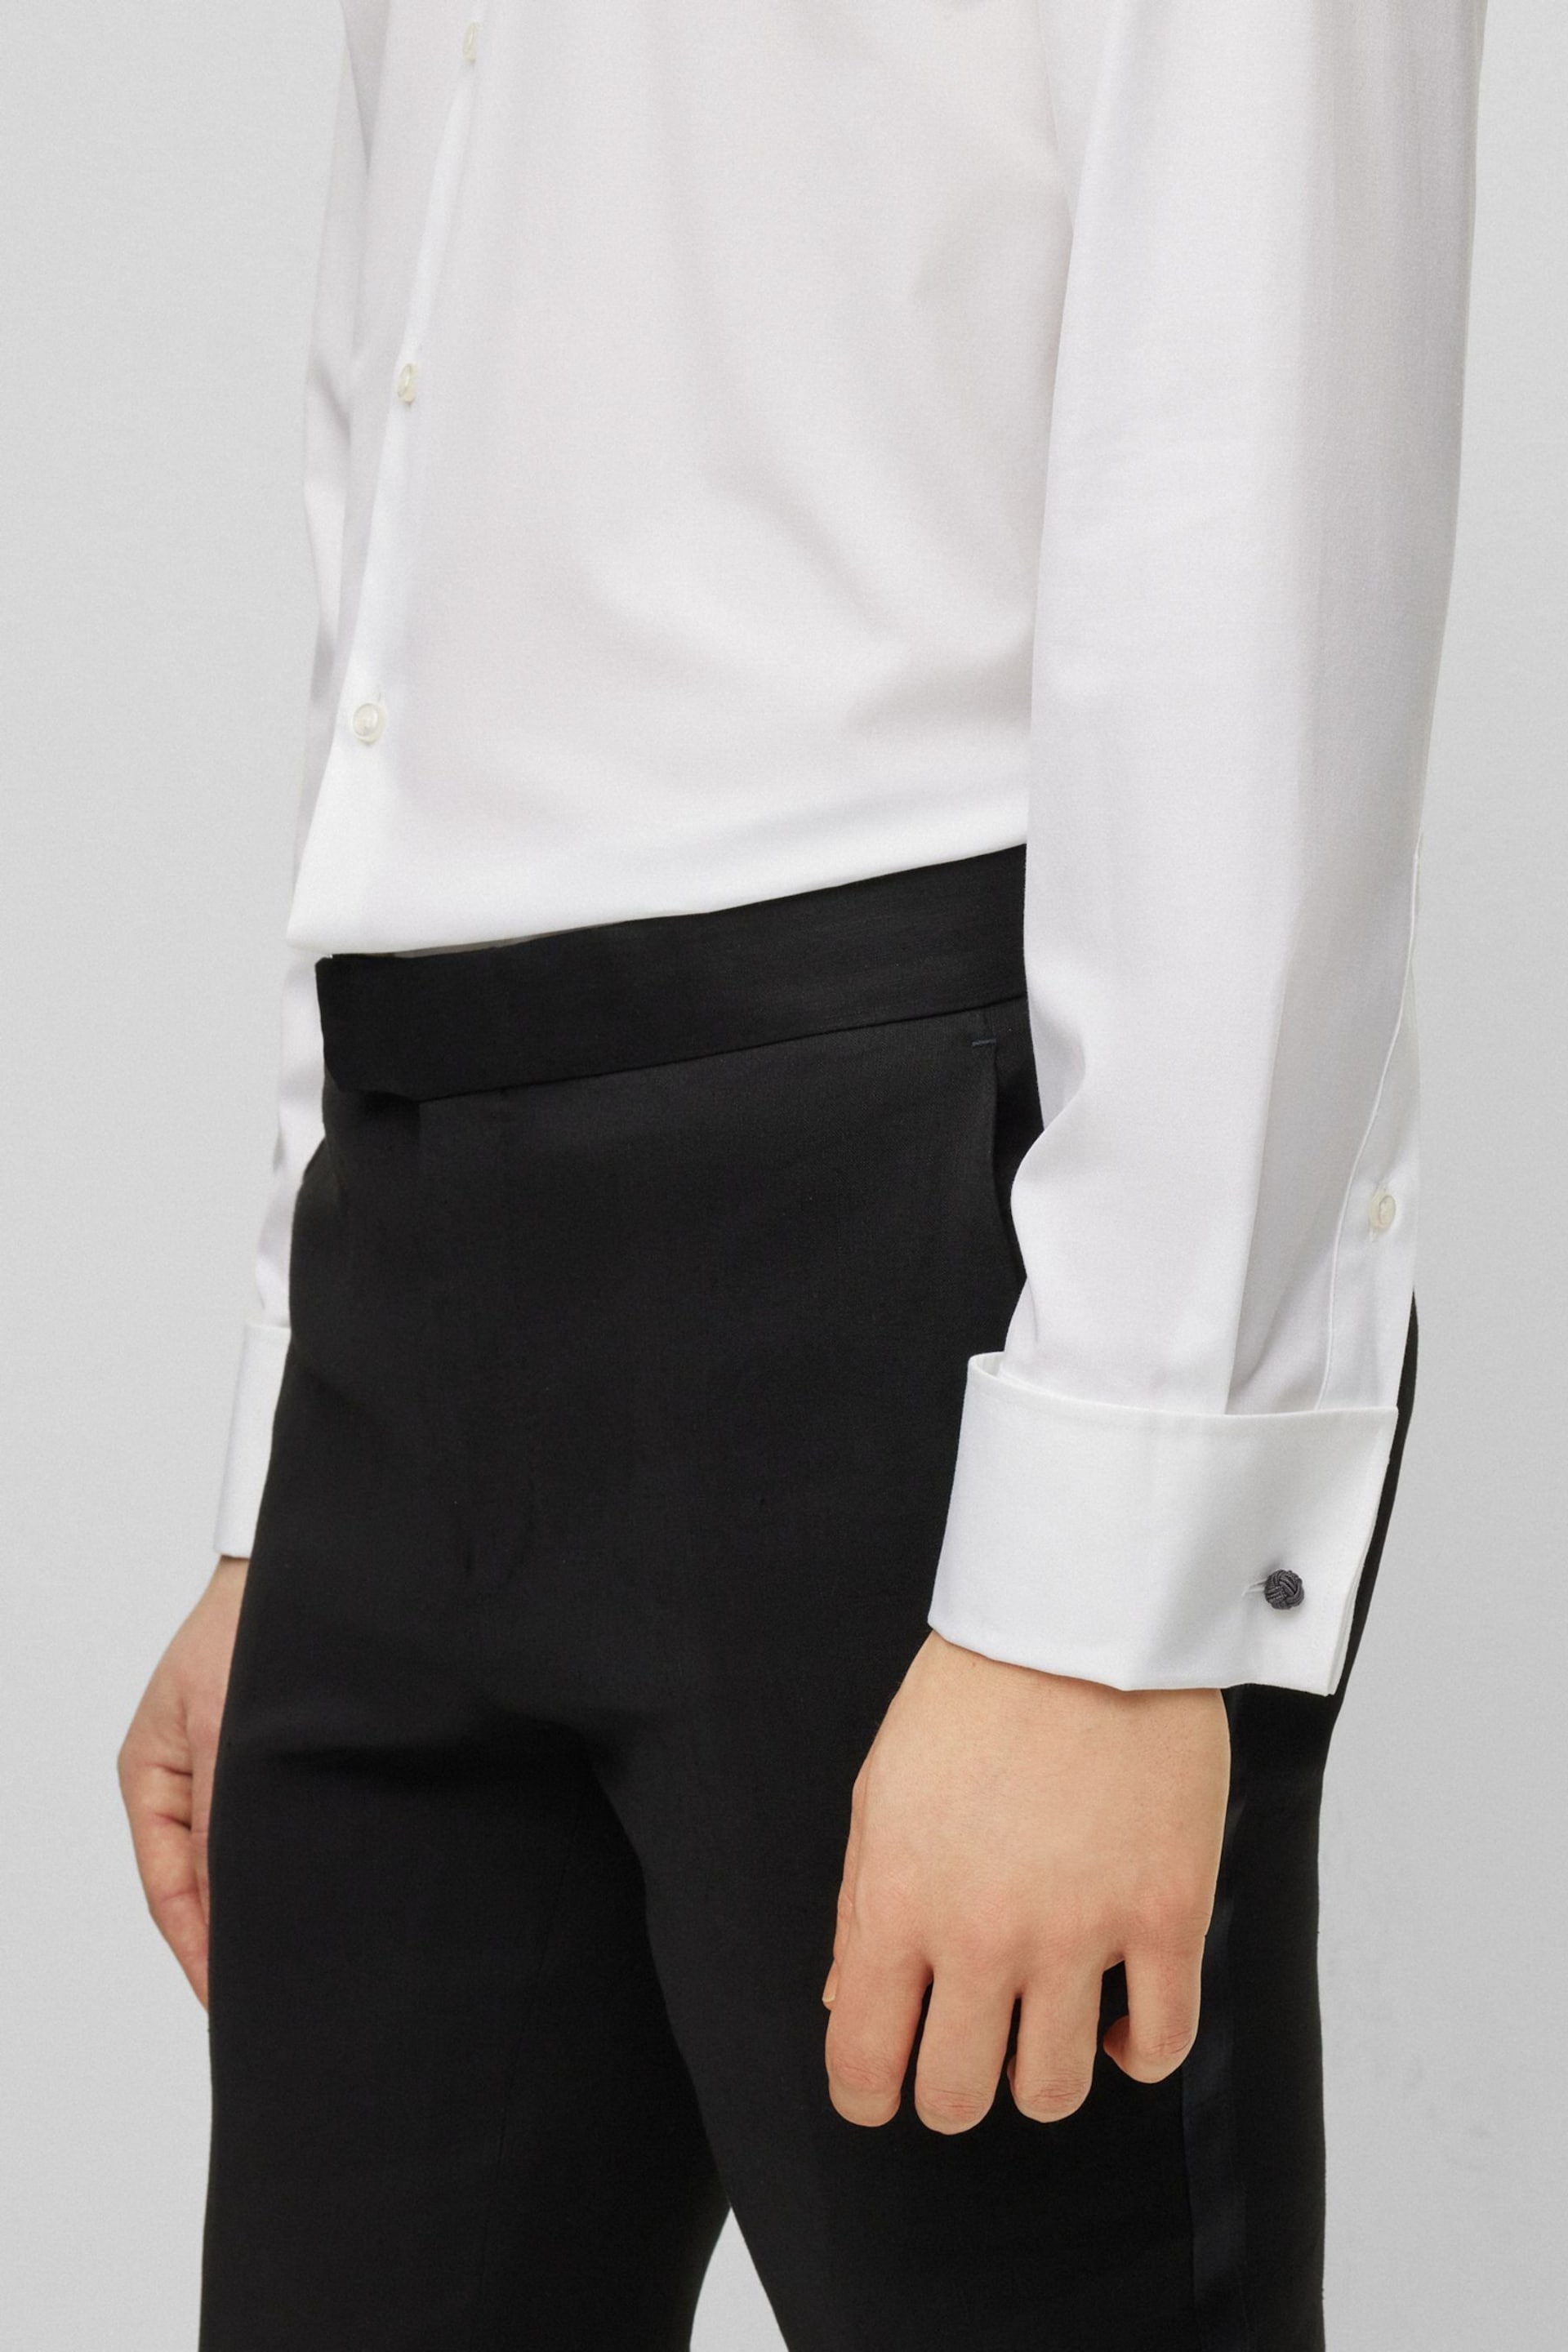 BOSS White Regular Fit Double Cuff Long Sleeve Shirt - Image 5 of 6